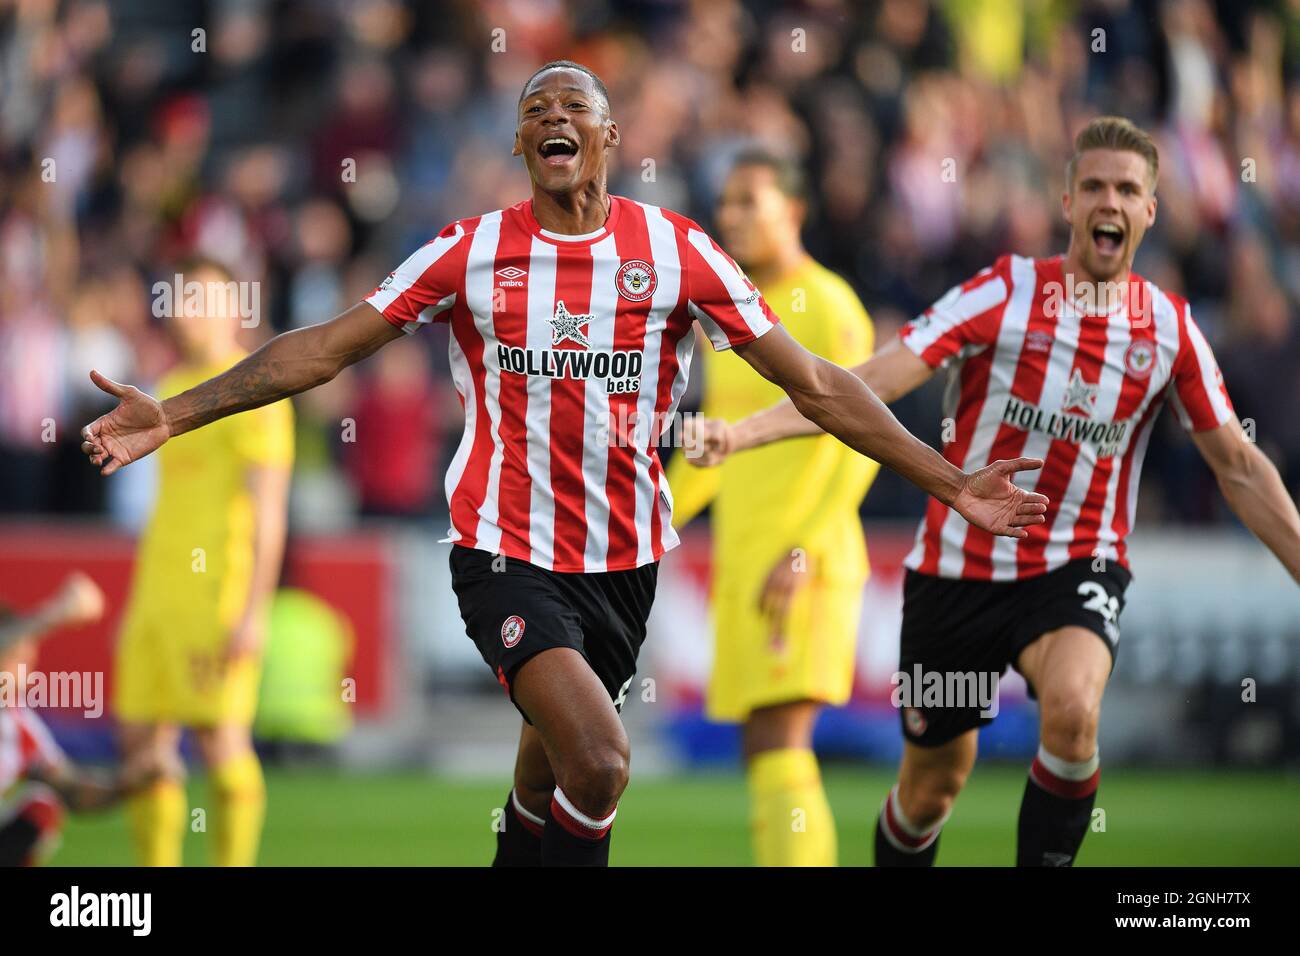 London, UK. 25th Sep, 2021. 25 September 2021 - Brentford v Liverpool - The Premier League Ethan Pinnock celebrates scoring the first goal for Brentford Picture Credit : Credit: Mark Pain/Alamy Live News Stock Photo